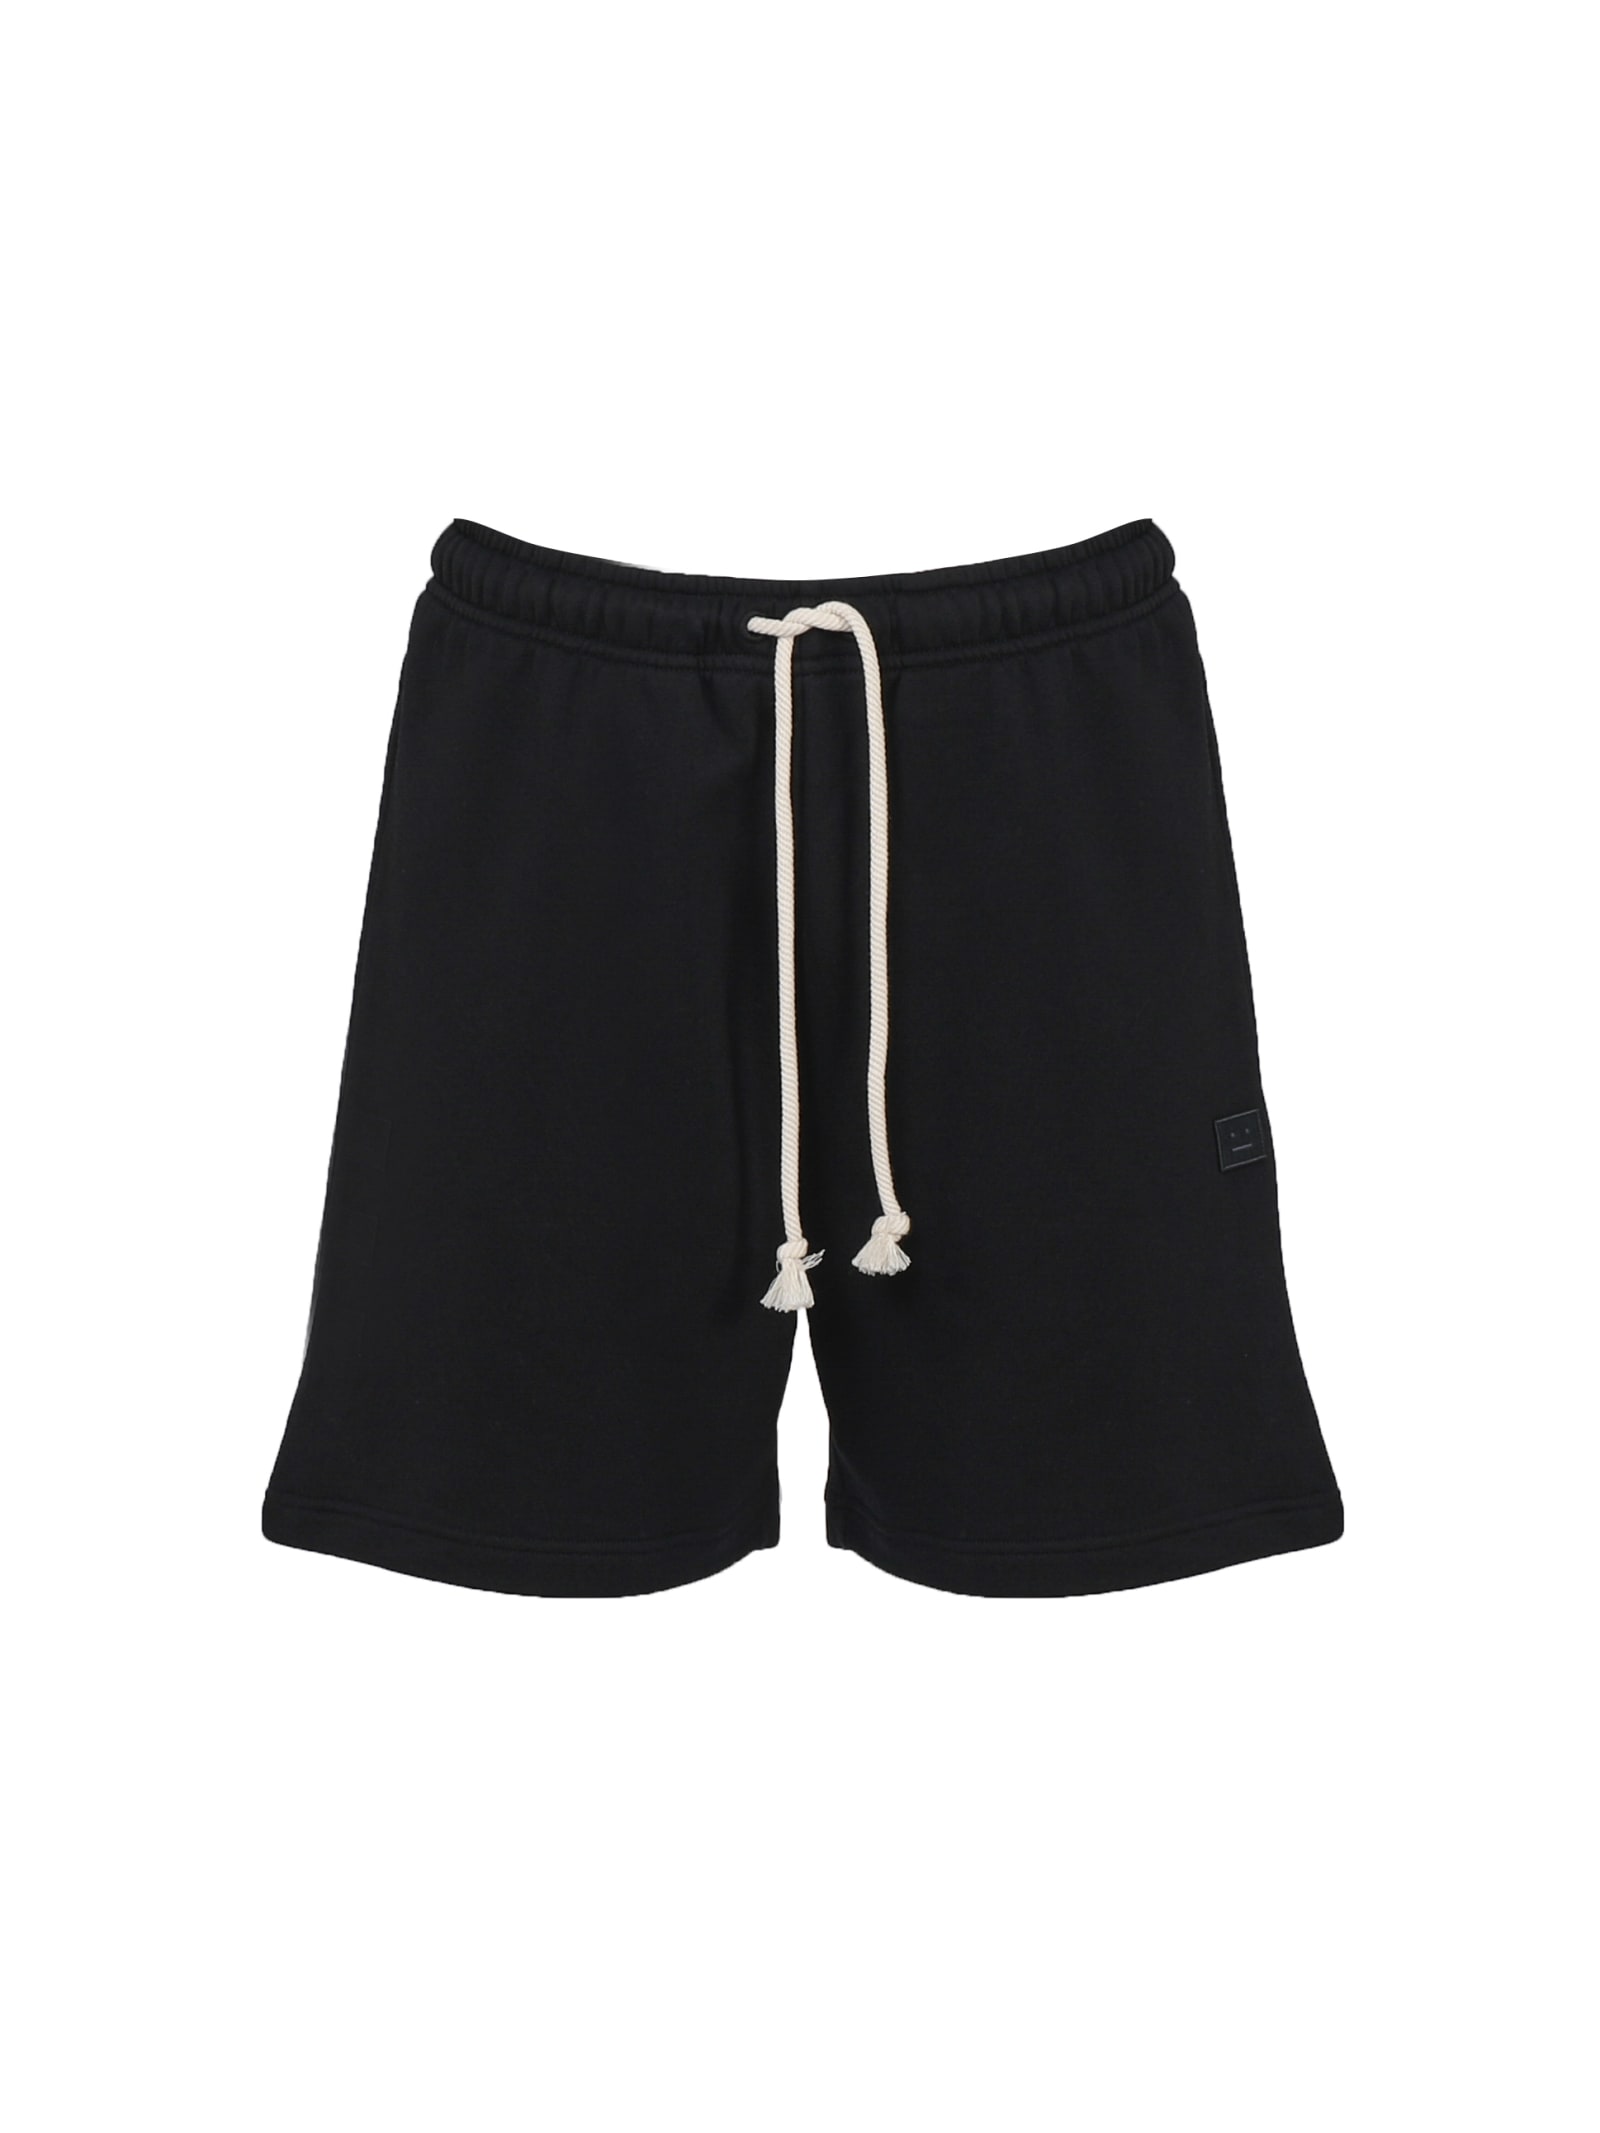 Acne Studios Cotton Shorts With Drawstrings